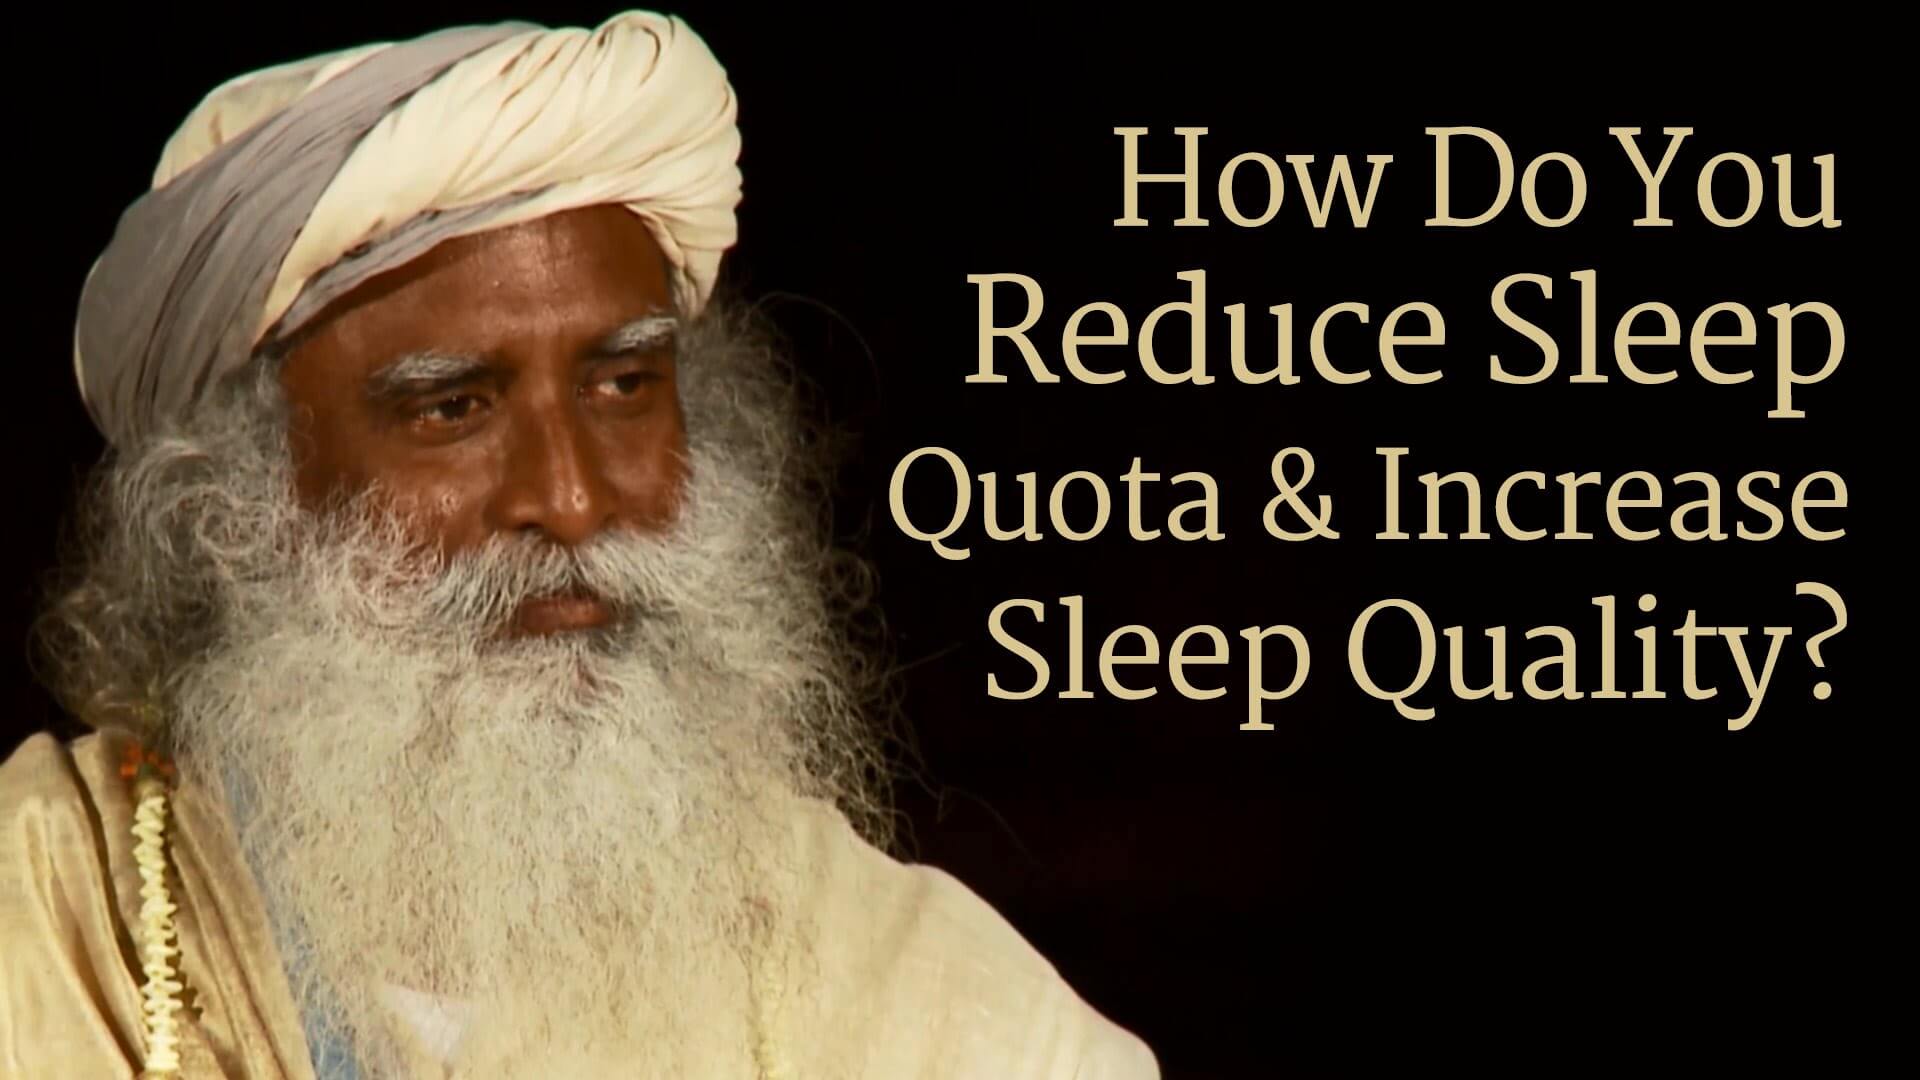 How to reduce sleep but stay healthy